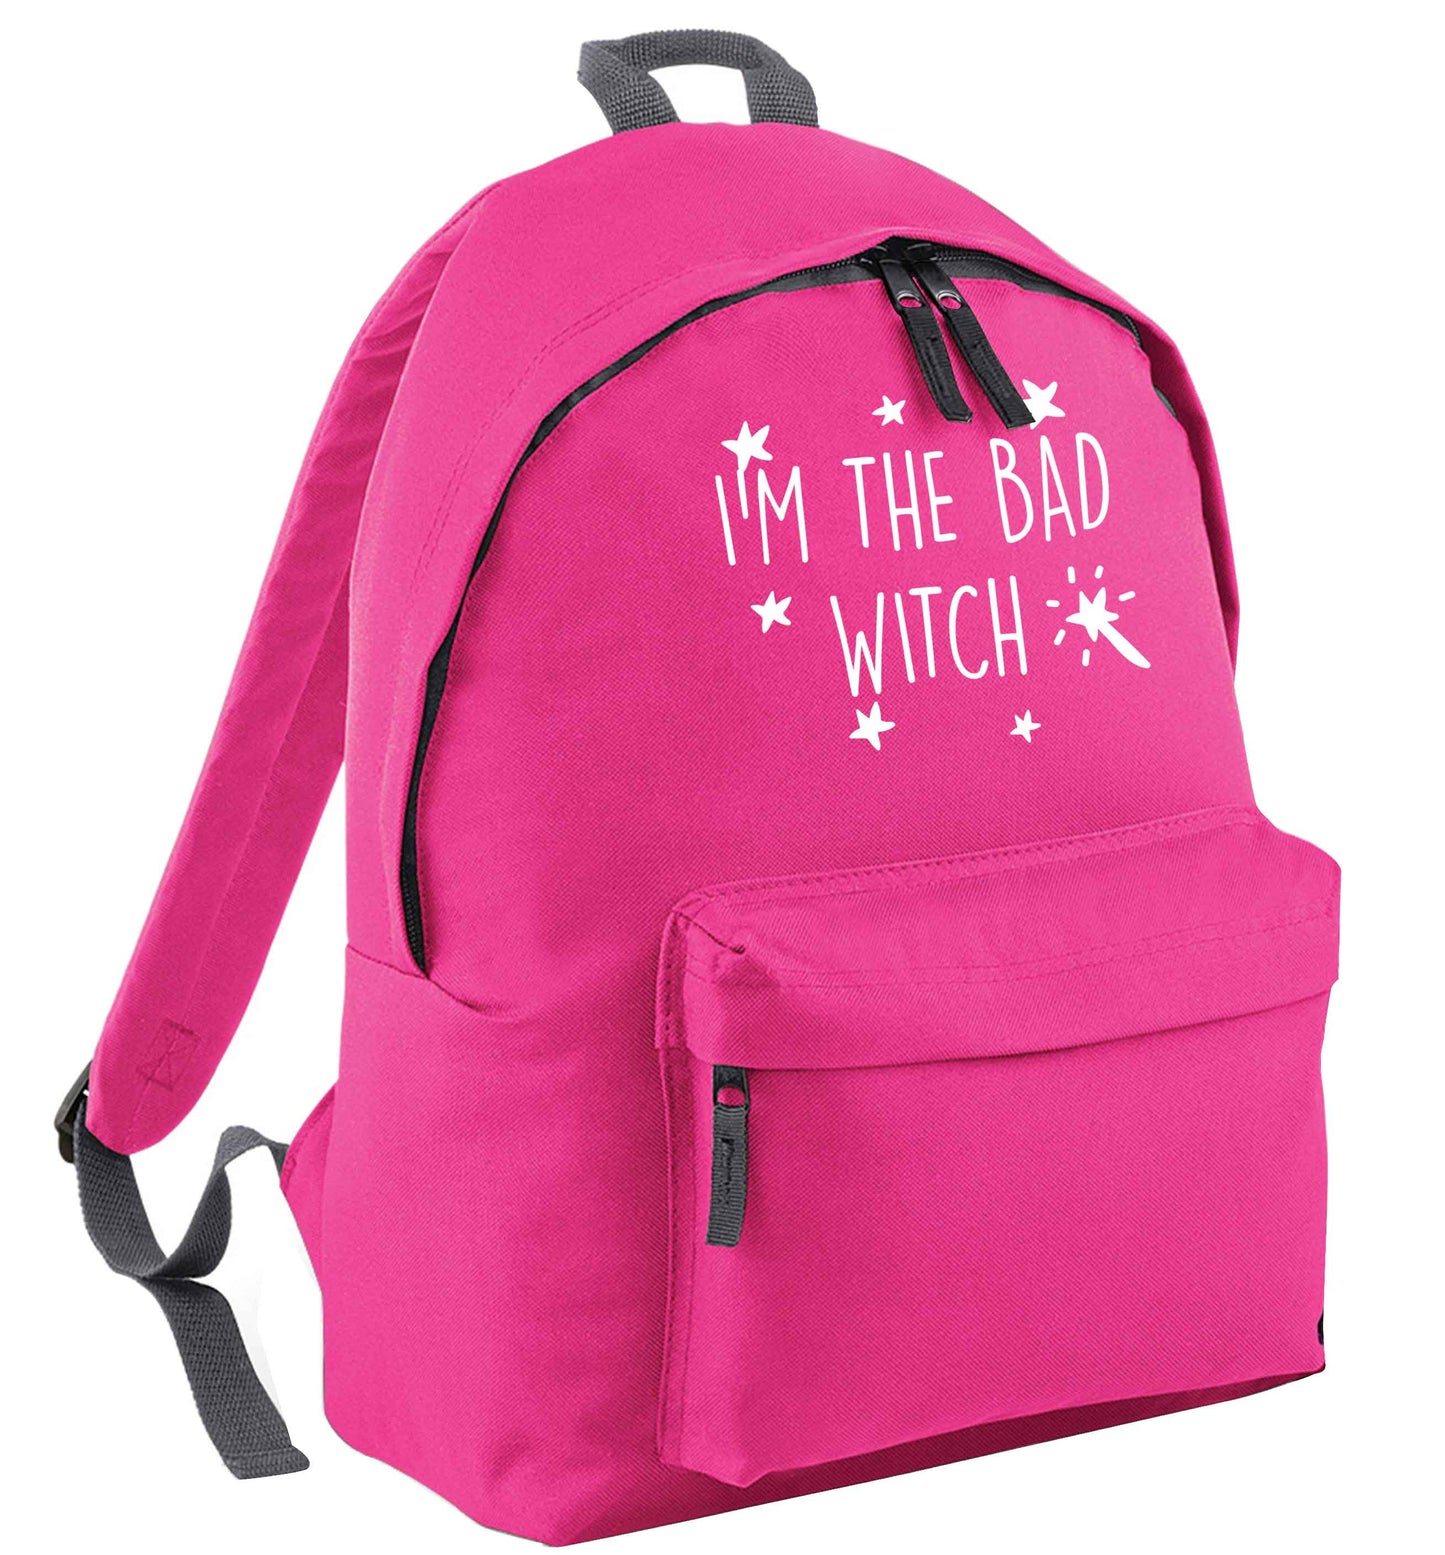 Bad witch pink adults backpack